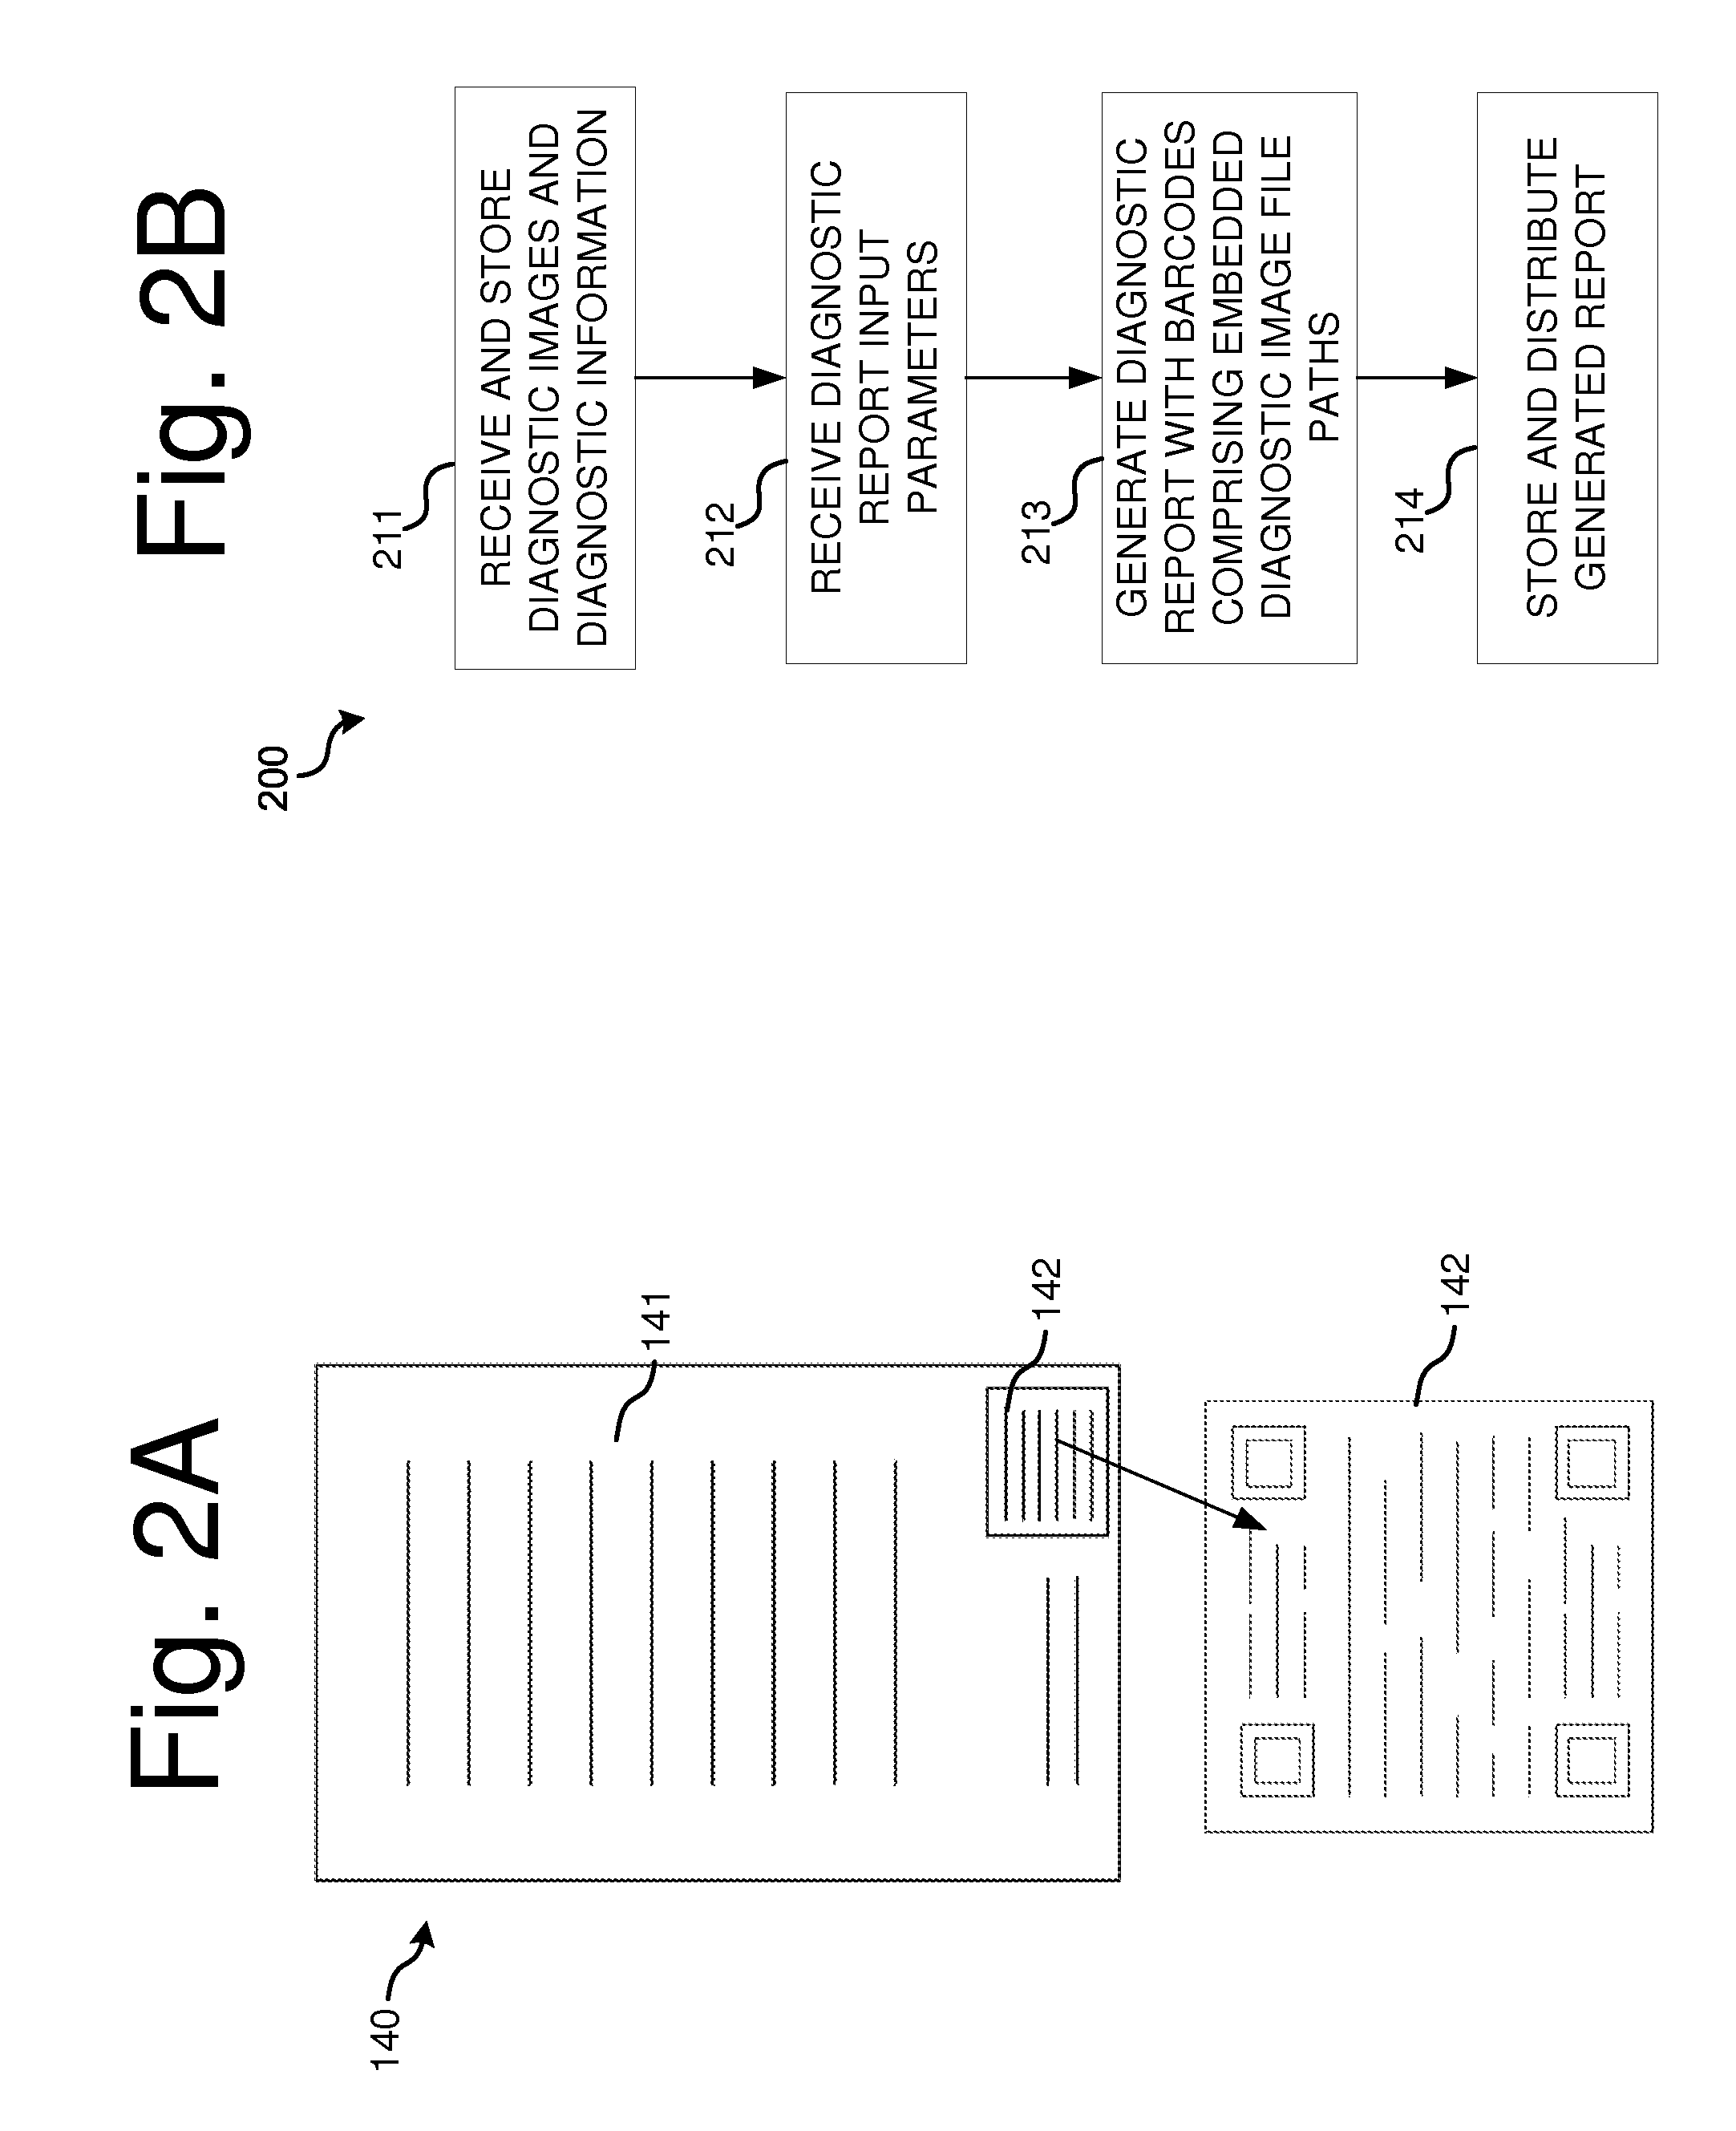 Method and system for distributing and accessing diagnostic images associated with diagnostic imaging report